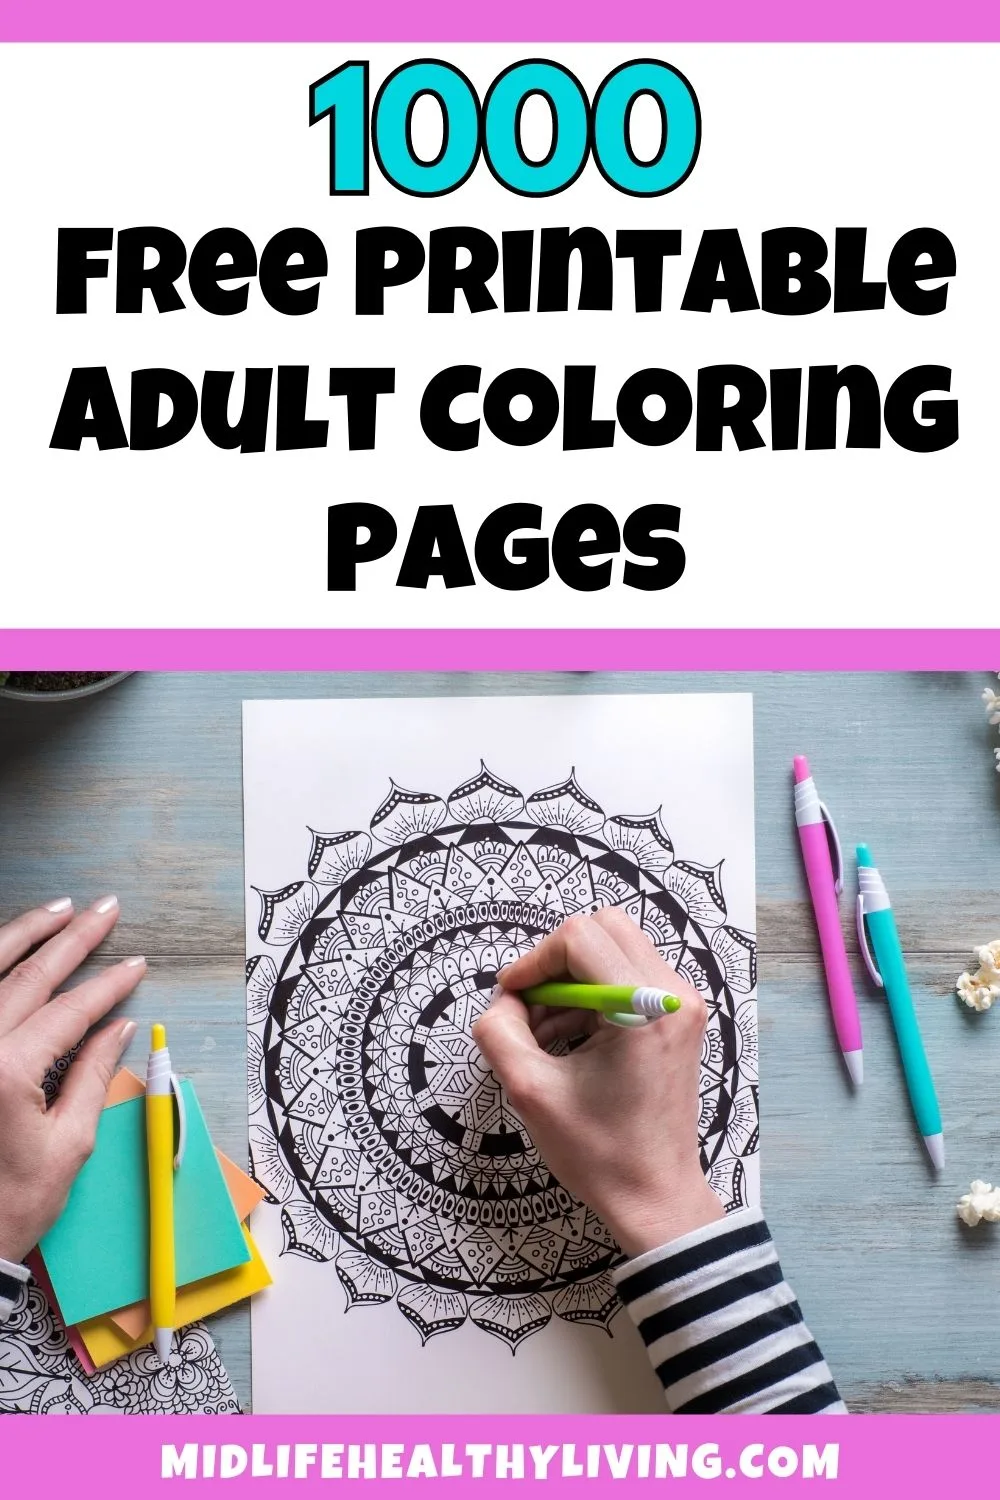 https://www.midlifehealthyliving.com/wp-content/uploads/2020/03/printable-adult-coloring-pages.jpg.webp